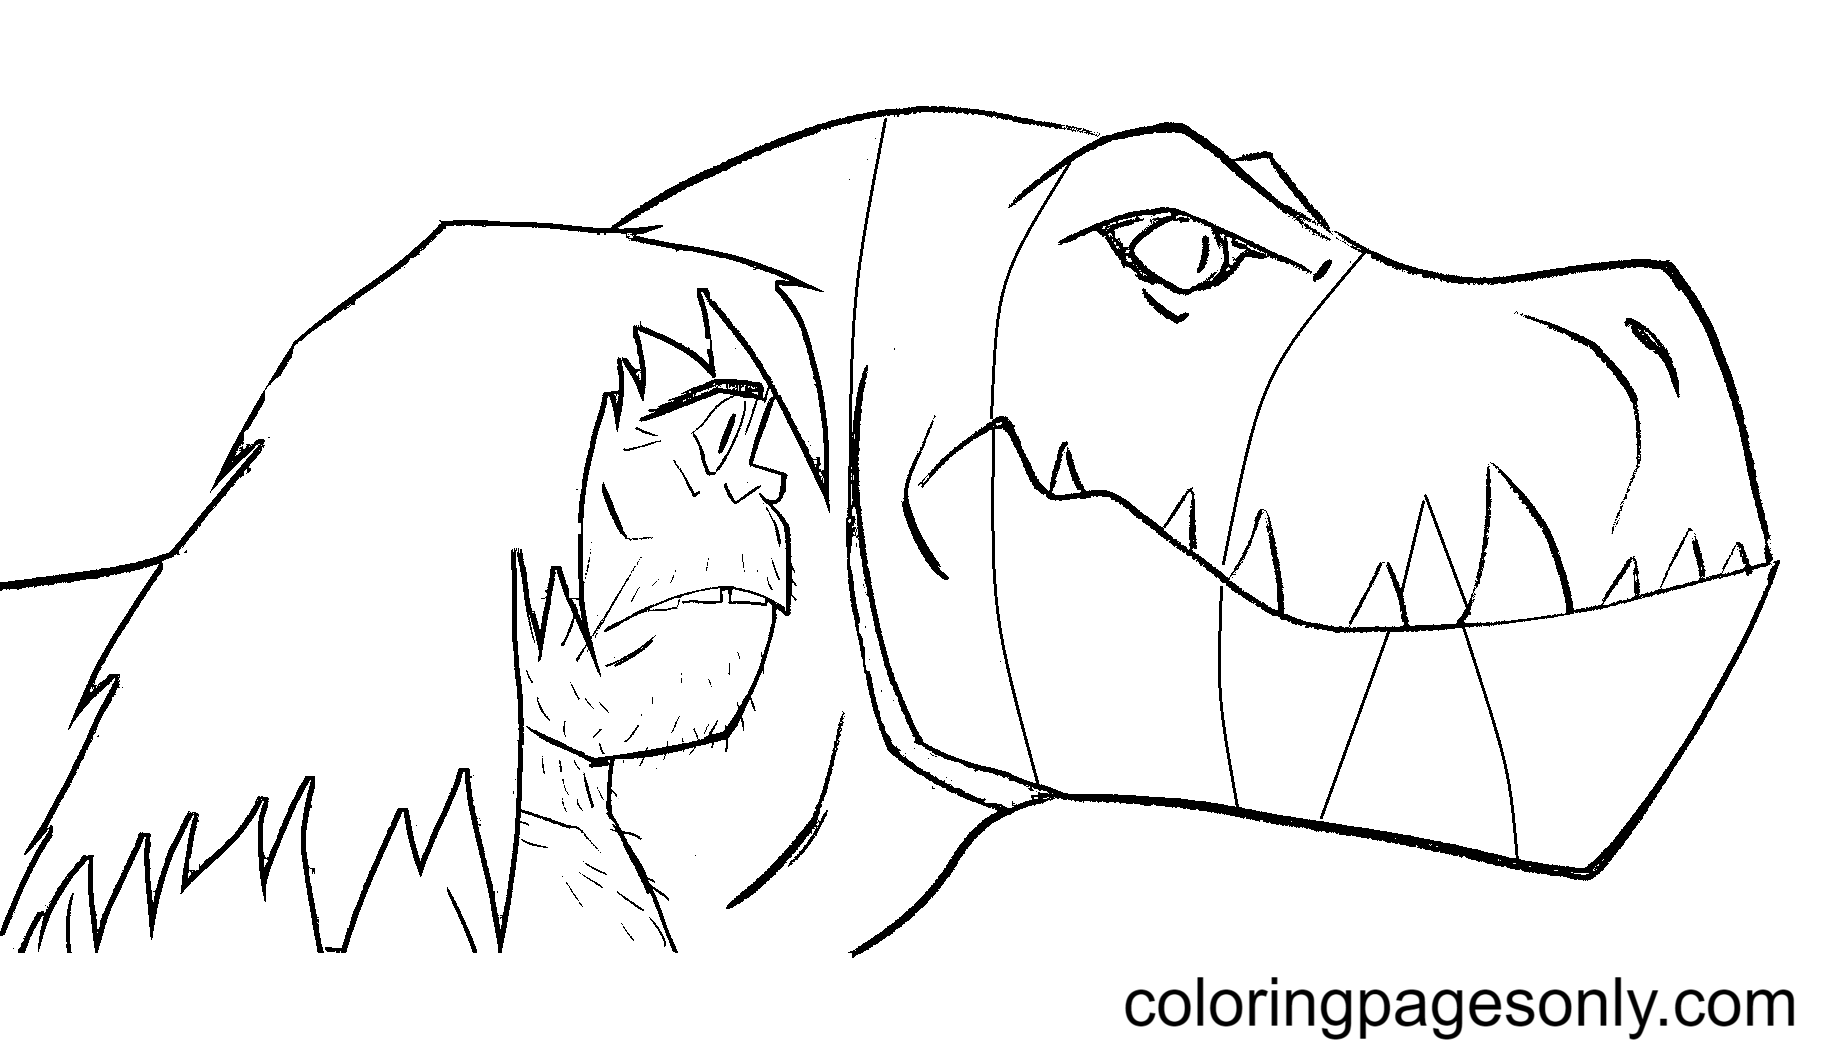 Primal - Spear With Fang Coloring Pages